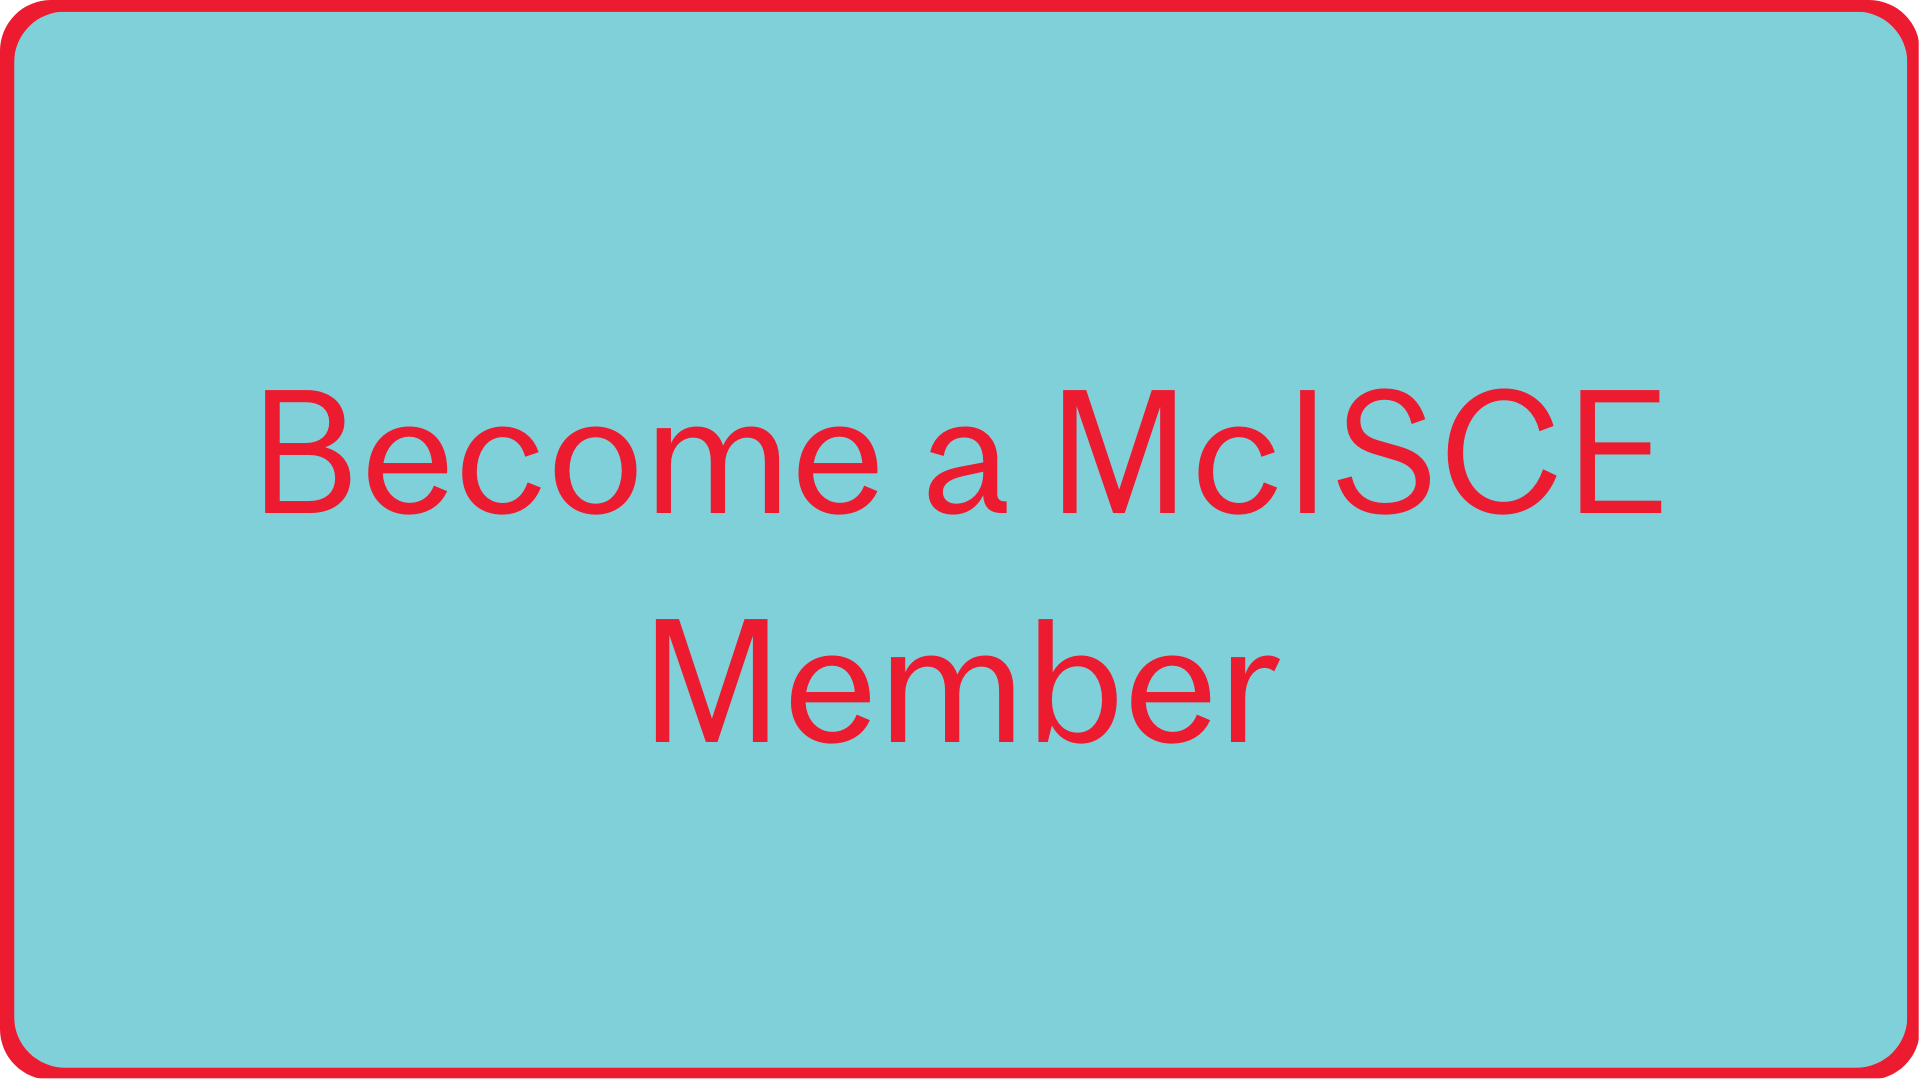 Become a McISCE member